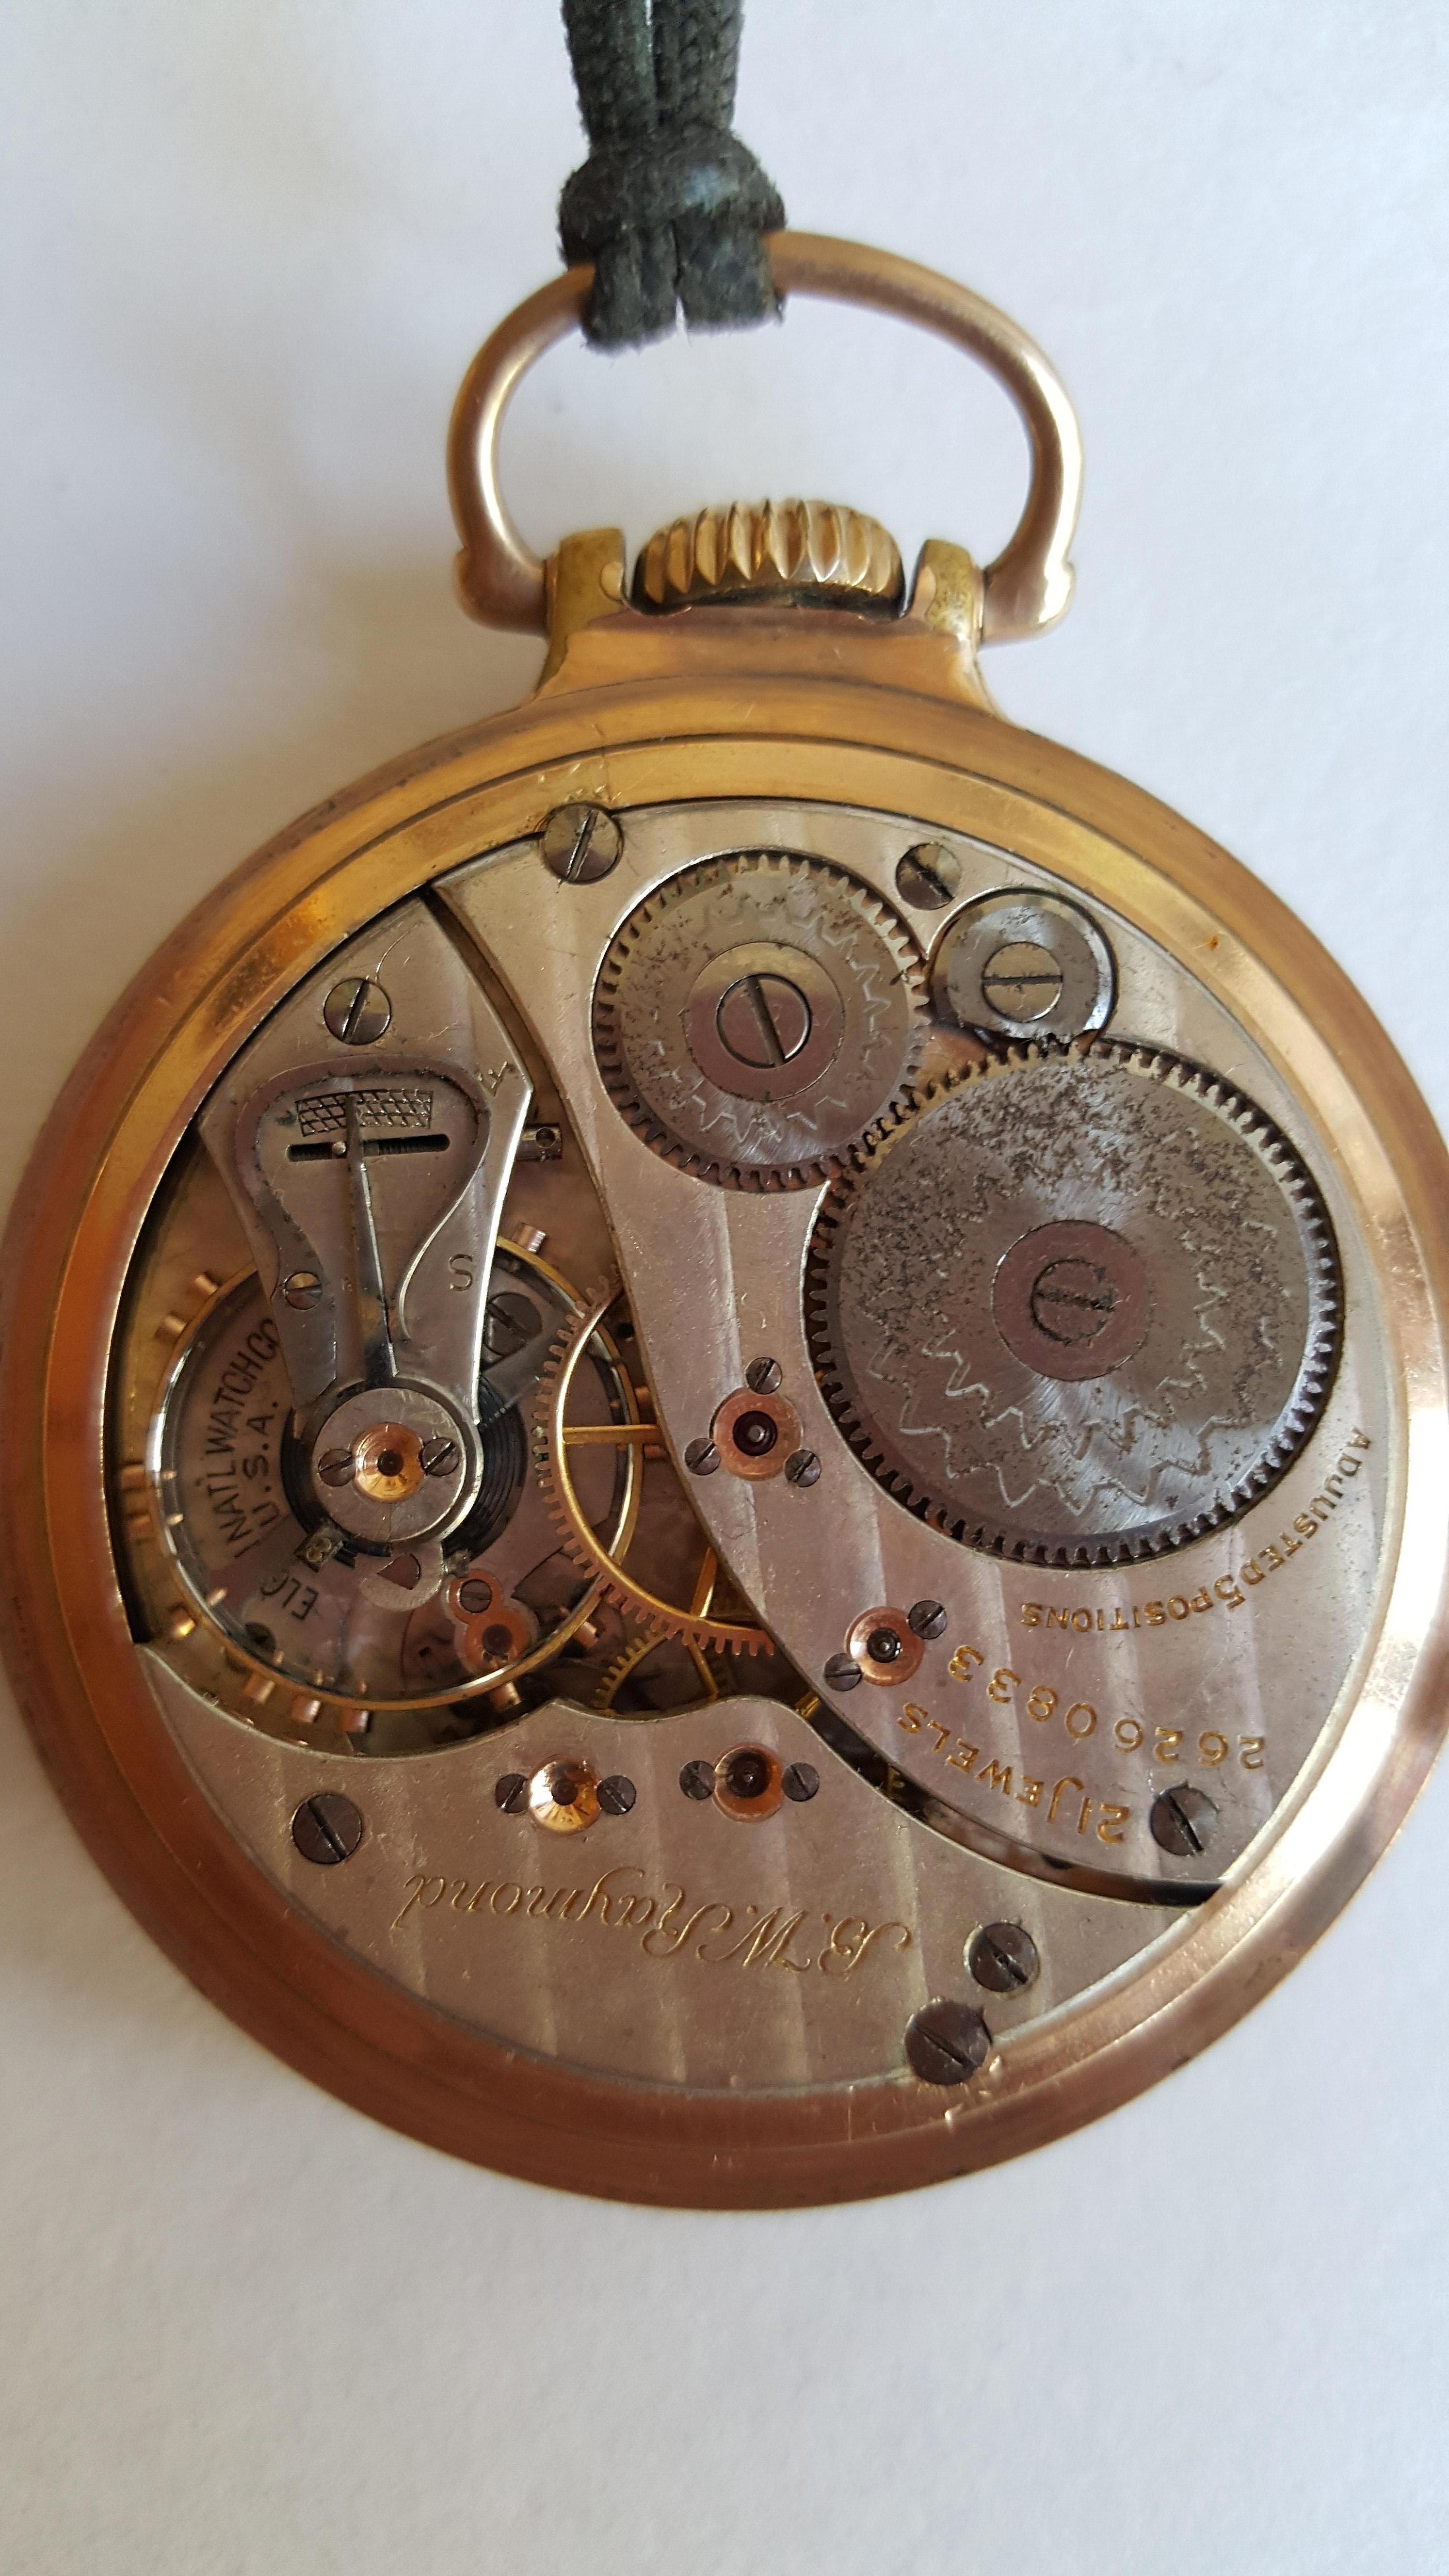 1924 Elgin Pocketwatch, Working, 21 Jewel, BW Raymond, Gold Filled, 50mm, Adjusted 5pt, Elgin National Watch Co., Chronograph. Acrylic crystal, White Face.

This watch has not been serviced with a complete clean and overhaul and it's sold as is. We